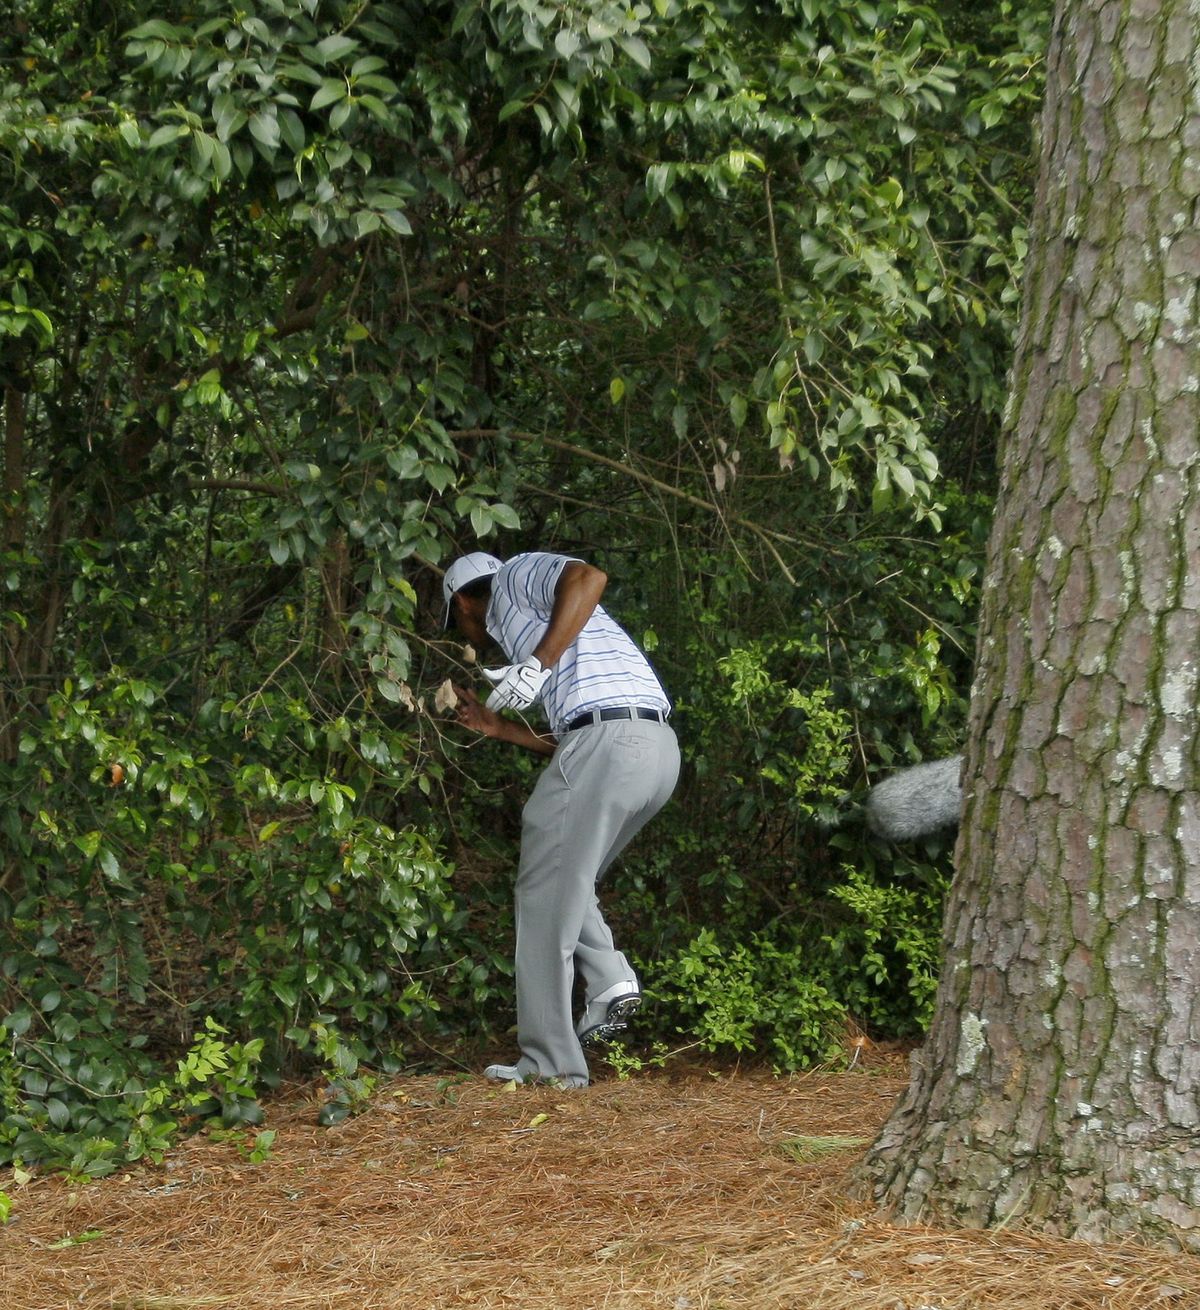 Tiger Woods goes into the woods off the second fairway to find his ball. He’s tied for 10th at 4 under.  (Associated Press / The Spokesman-Review)